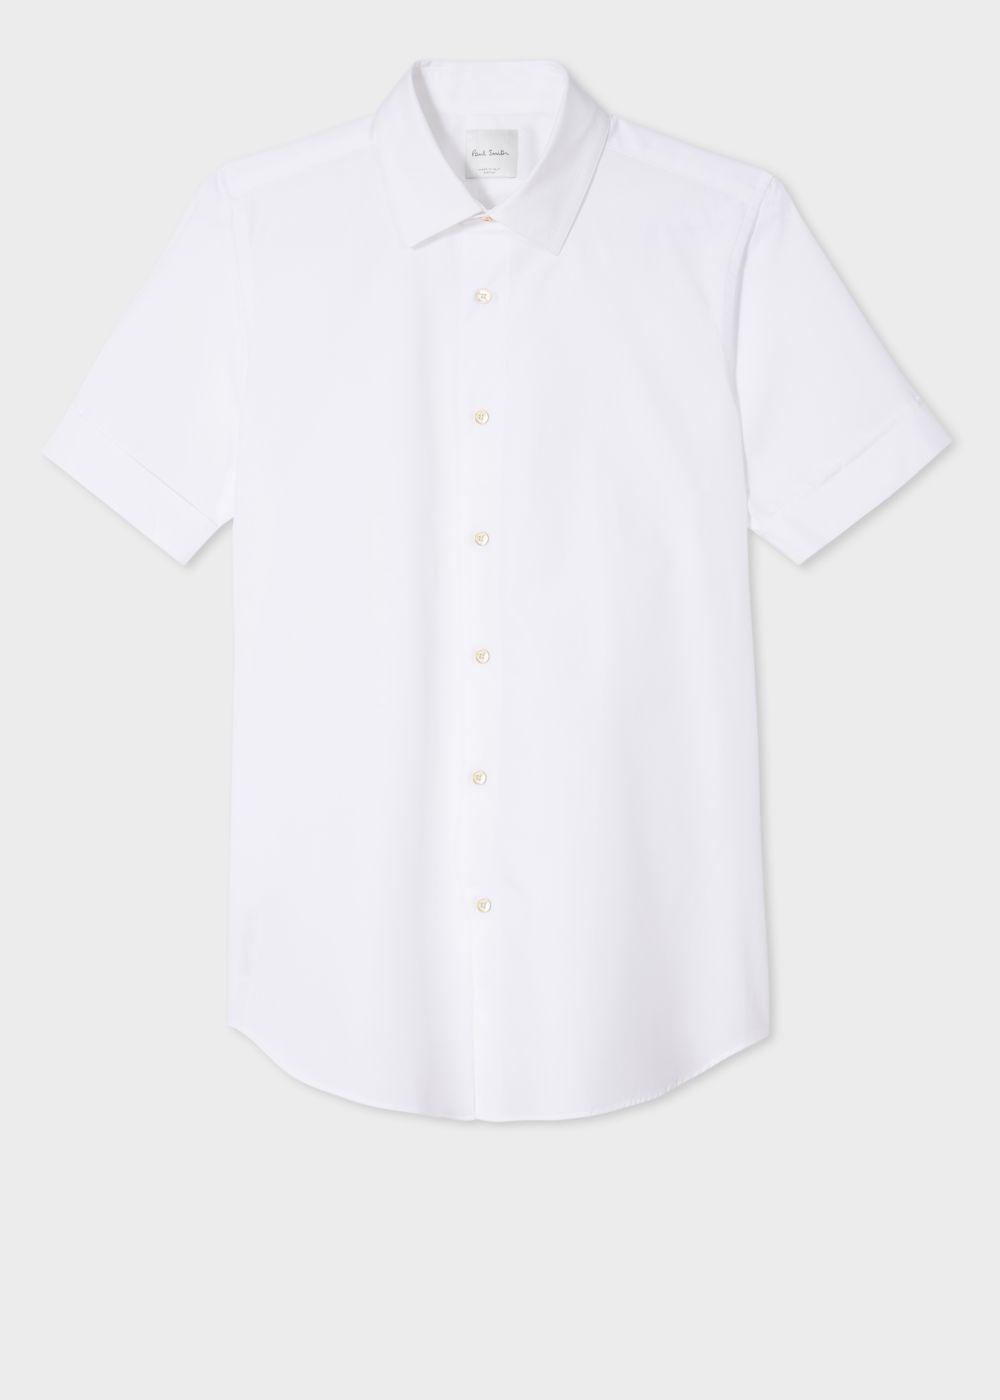 Lyst - Paul smith Men's Slim-Fit White Cotton Short-Sleeve Shirt in ...